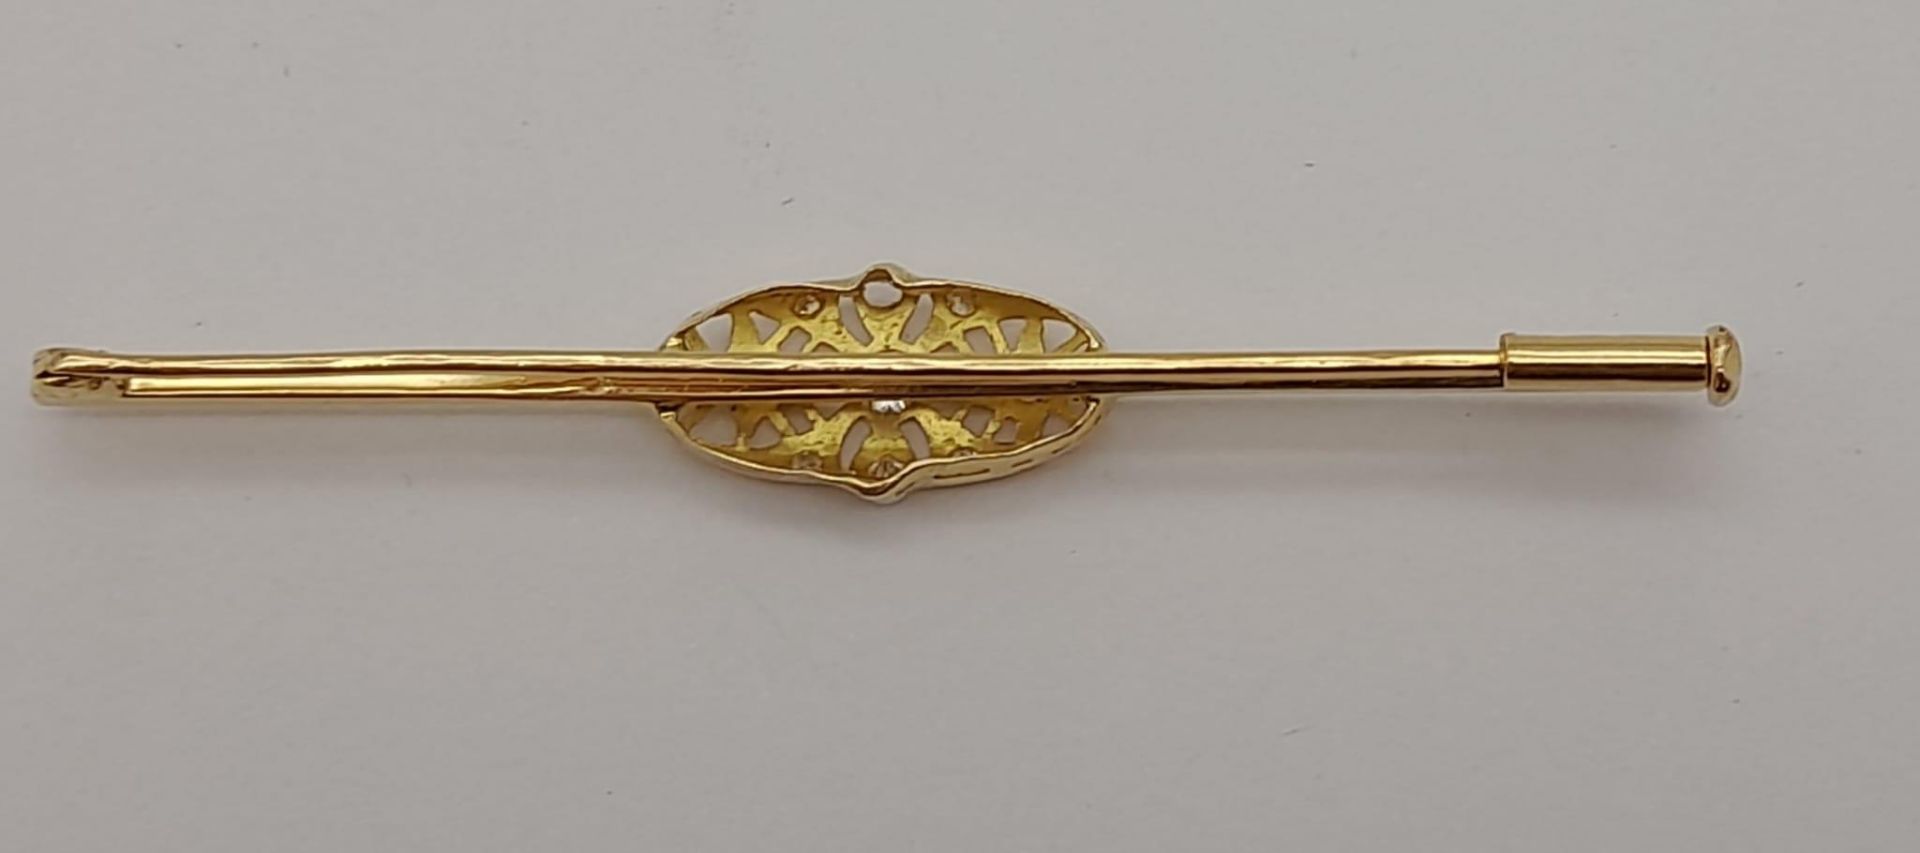 AN ANTIQUE 18K GOLD AND DIAMOND BAR BROOCH IN ART DECO STYLE . 4.7gms - Image 2 of 3